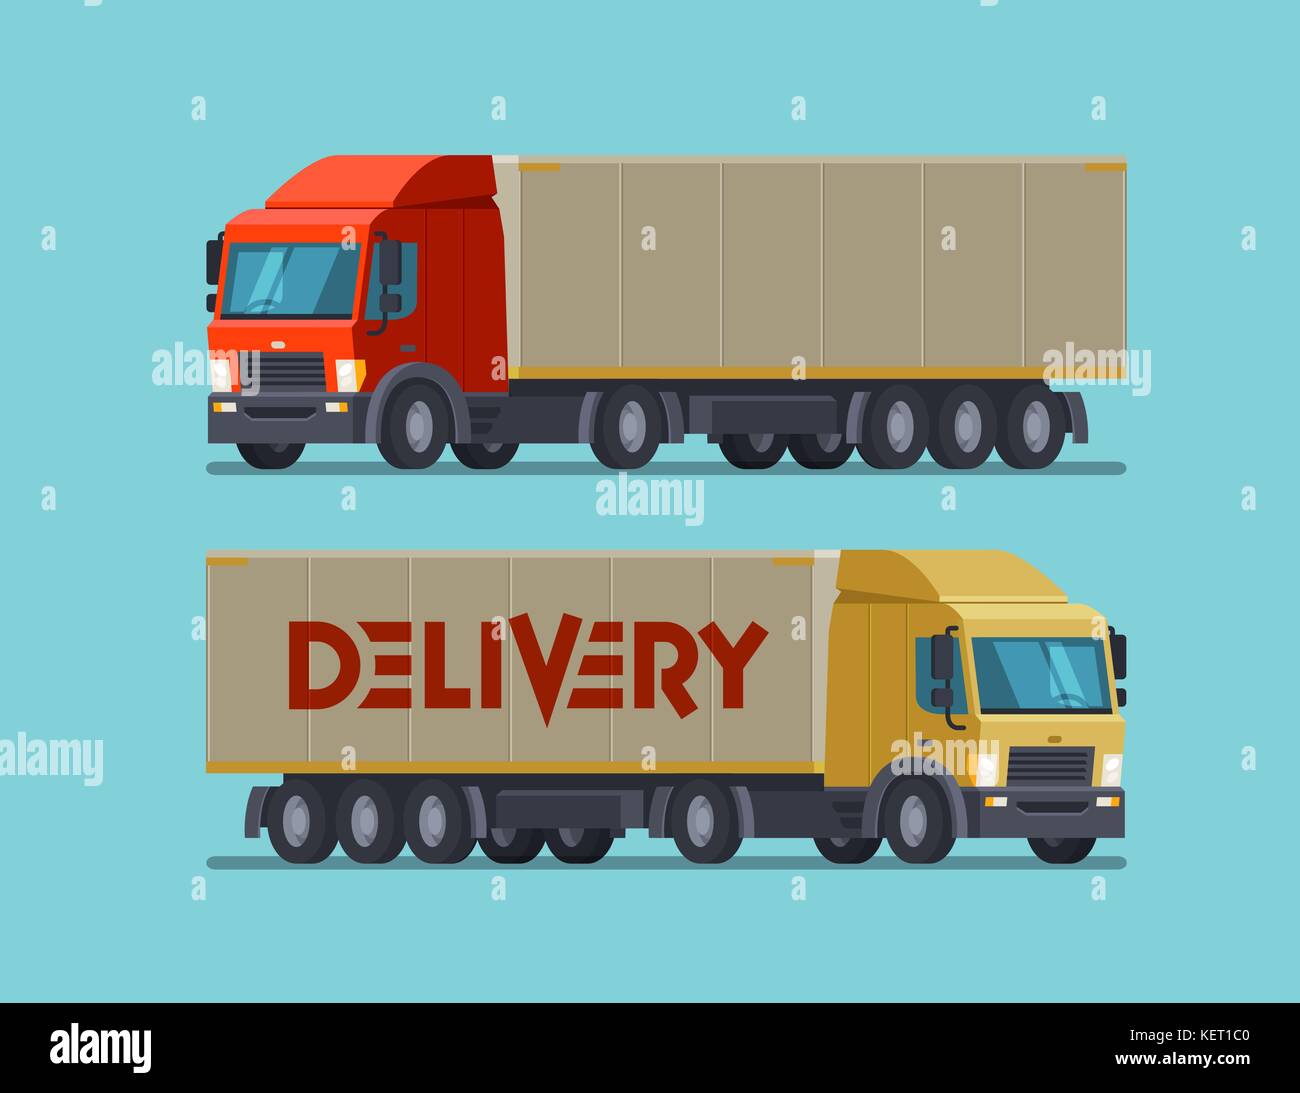 Truck, lorry symbol or icon. Delivery, shipping, shipment concept. Cartoon vector illustration Stock Vector